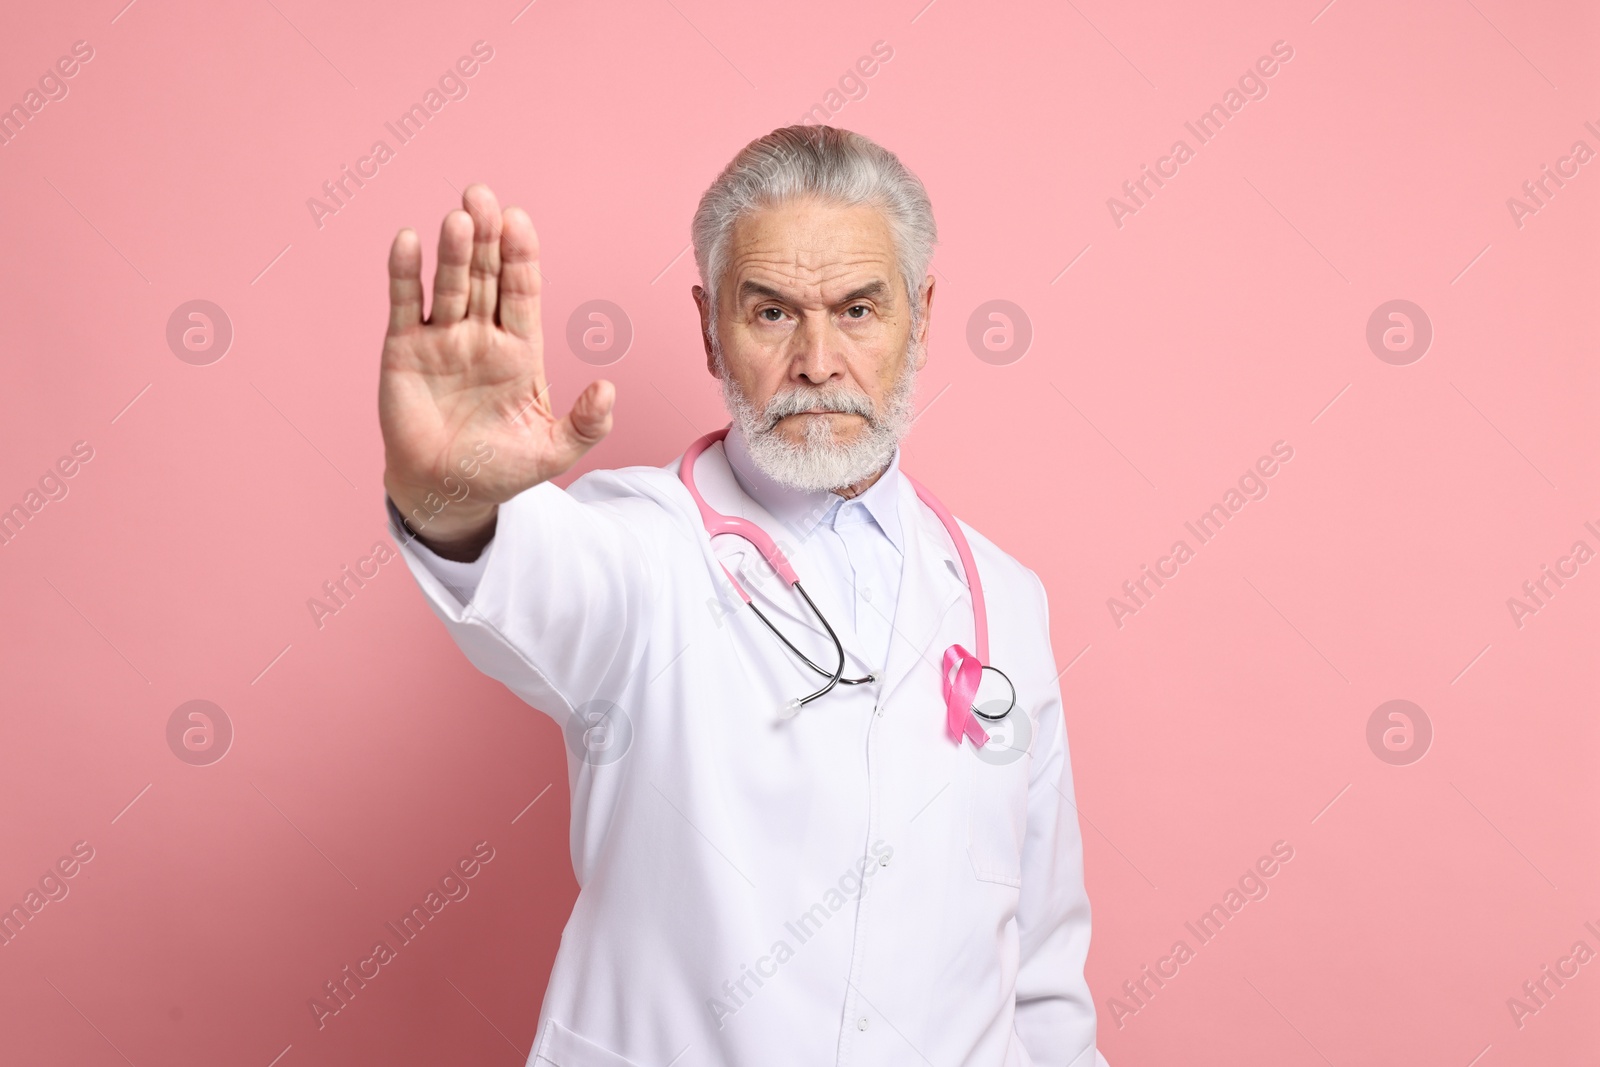 Photo of Mammologist with pink ribbon showing stop gesture on color background. Breast cancer awareness